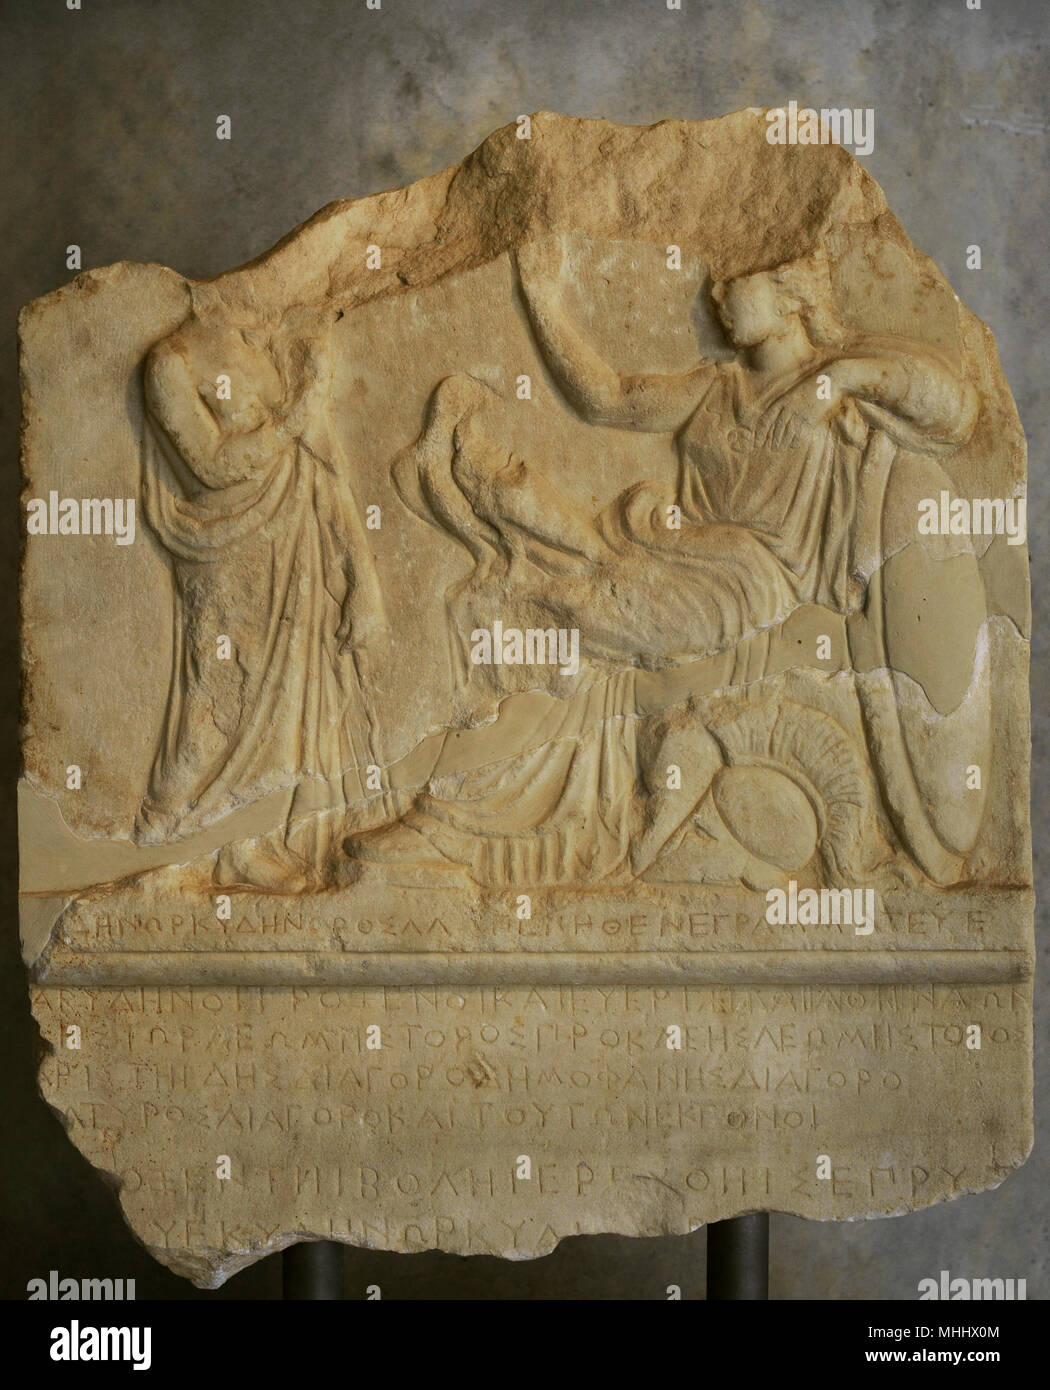 Honorary decree for the proxenoi (consul) of Abydos. The Athenians honor the proxenoi of Abydos, a city on the Asiatic coast of the Hellespont. On the relief, Athena with an eagle on her lap, a symbol of Abydos, converses with a representative of the proxenoi (consuls). First quarter of the 4th century BC. Acropolis Museum. Athens. Greece. Stock Photo